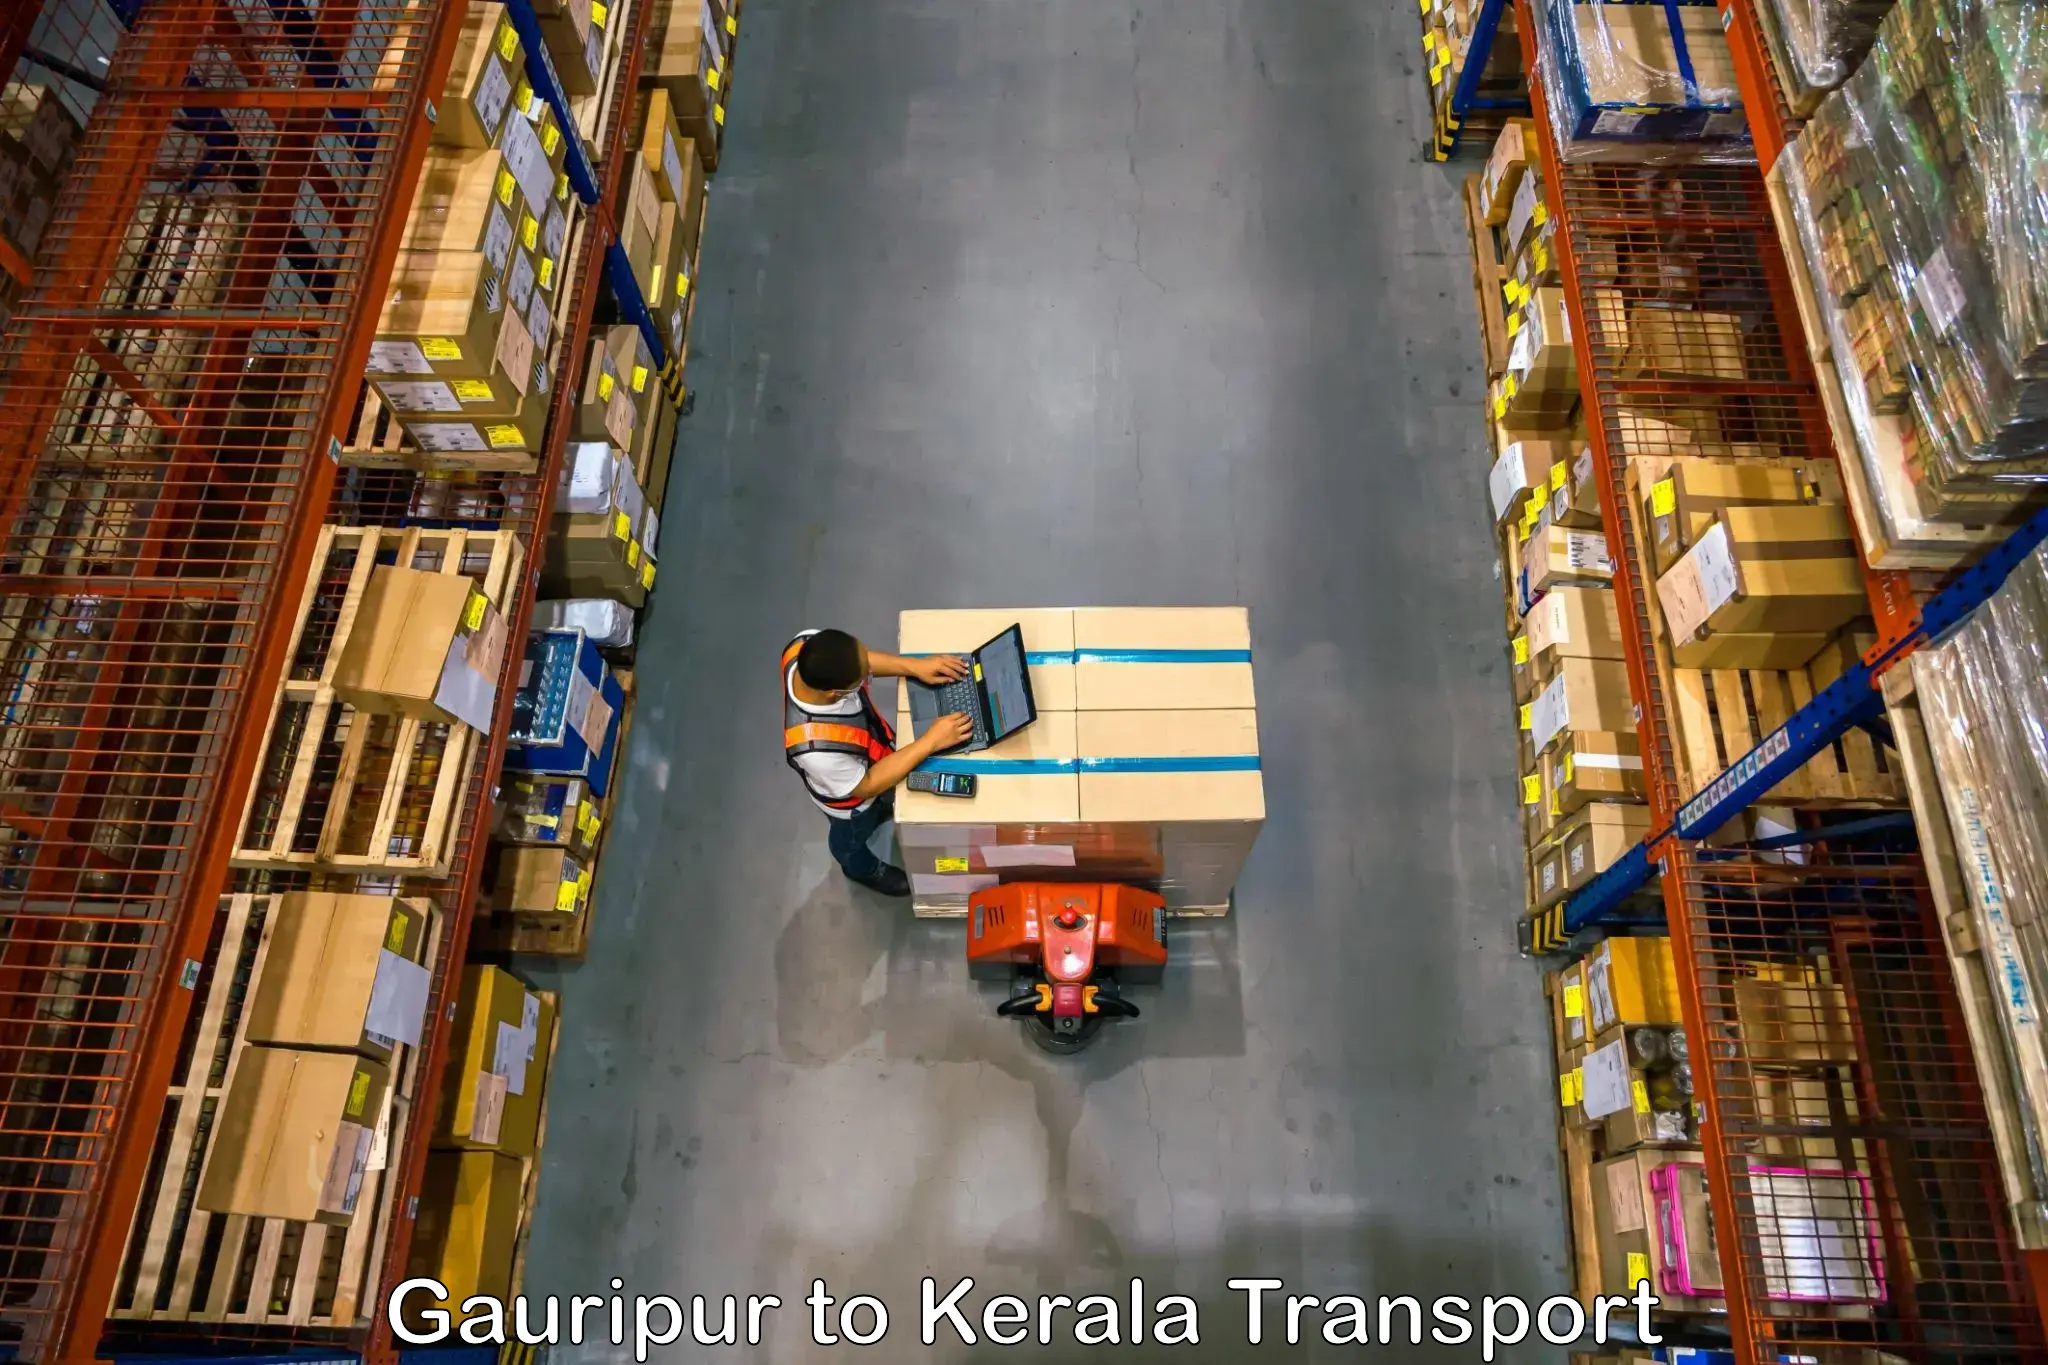 Container transport service Gauripur to Kuttikol